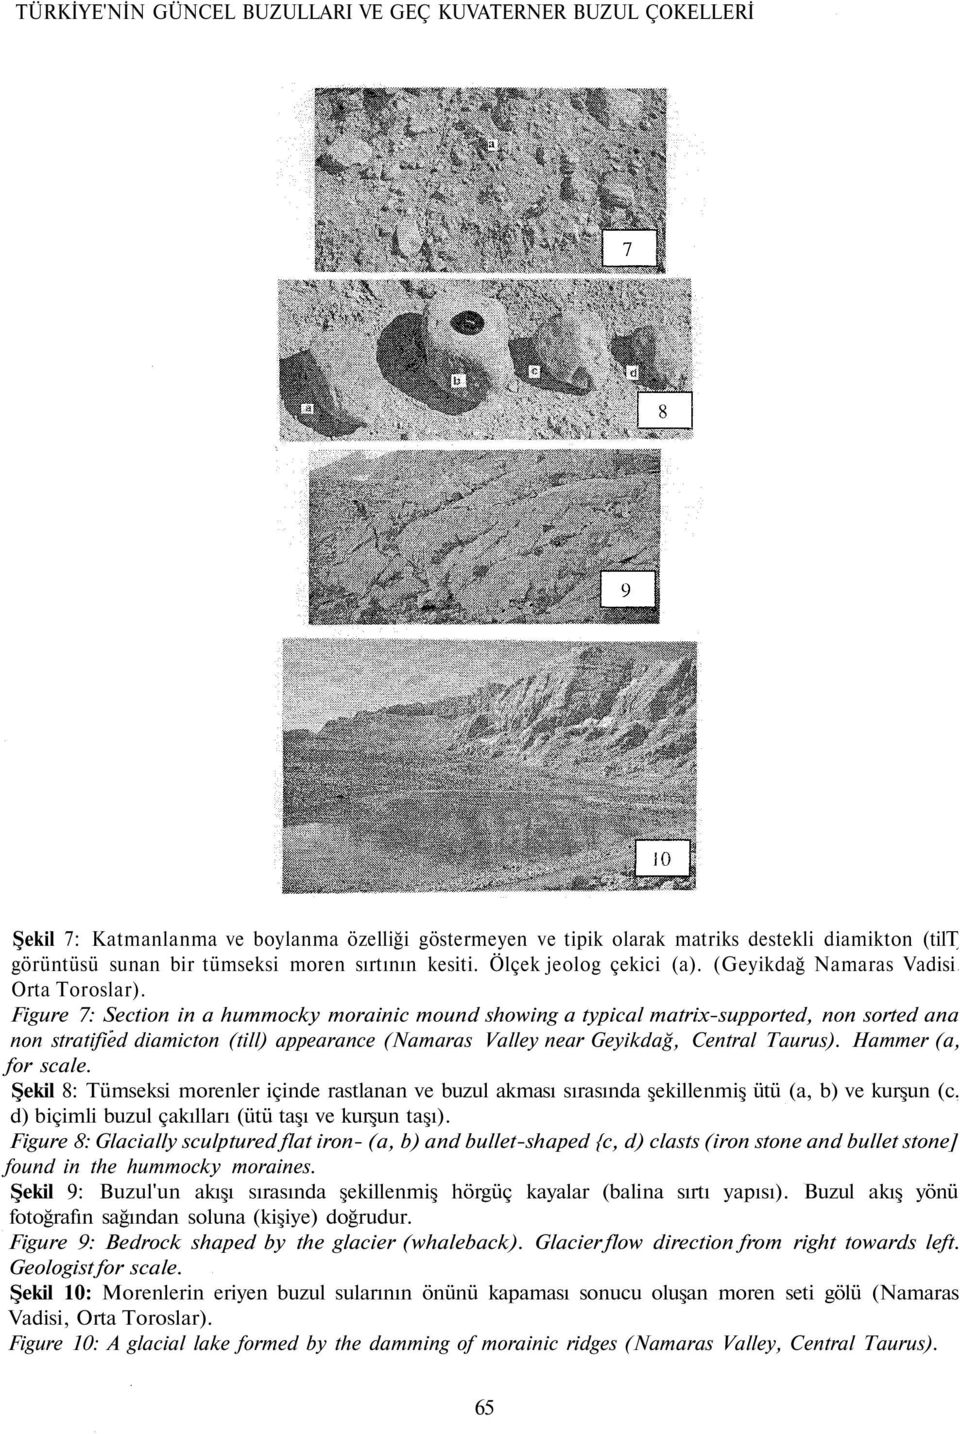 Figure 7: Section in a hummocky morainic mound showing a typical matrix-supported, non sorted ana non stratified diamicton (till) appearance (Namaras Valley near Geyikdağ, Central Taurus).